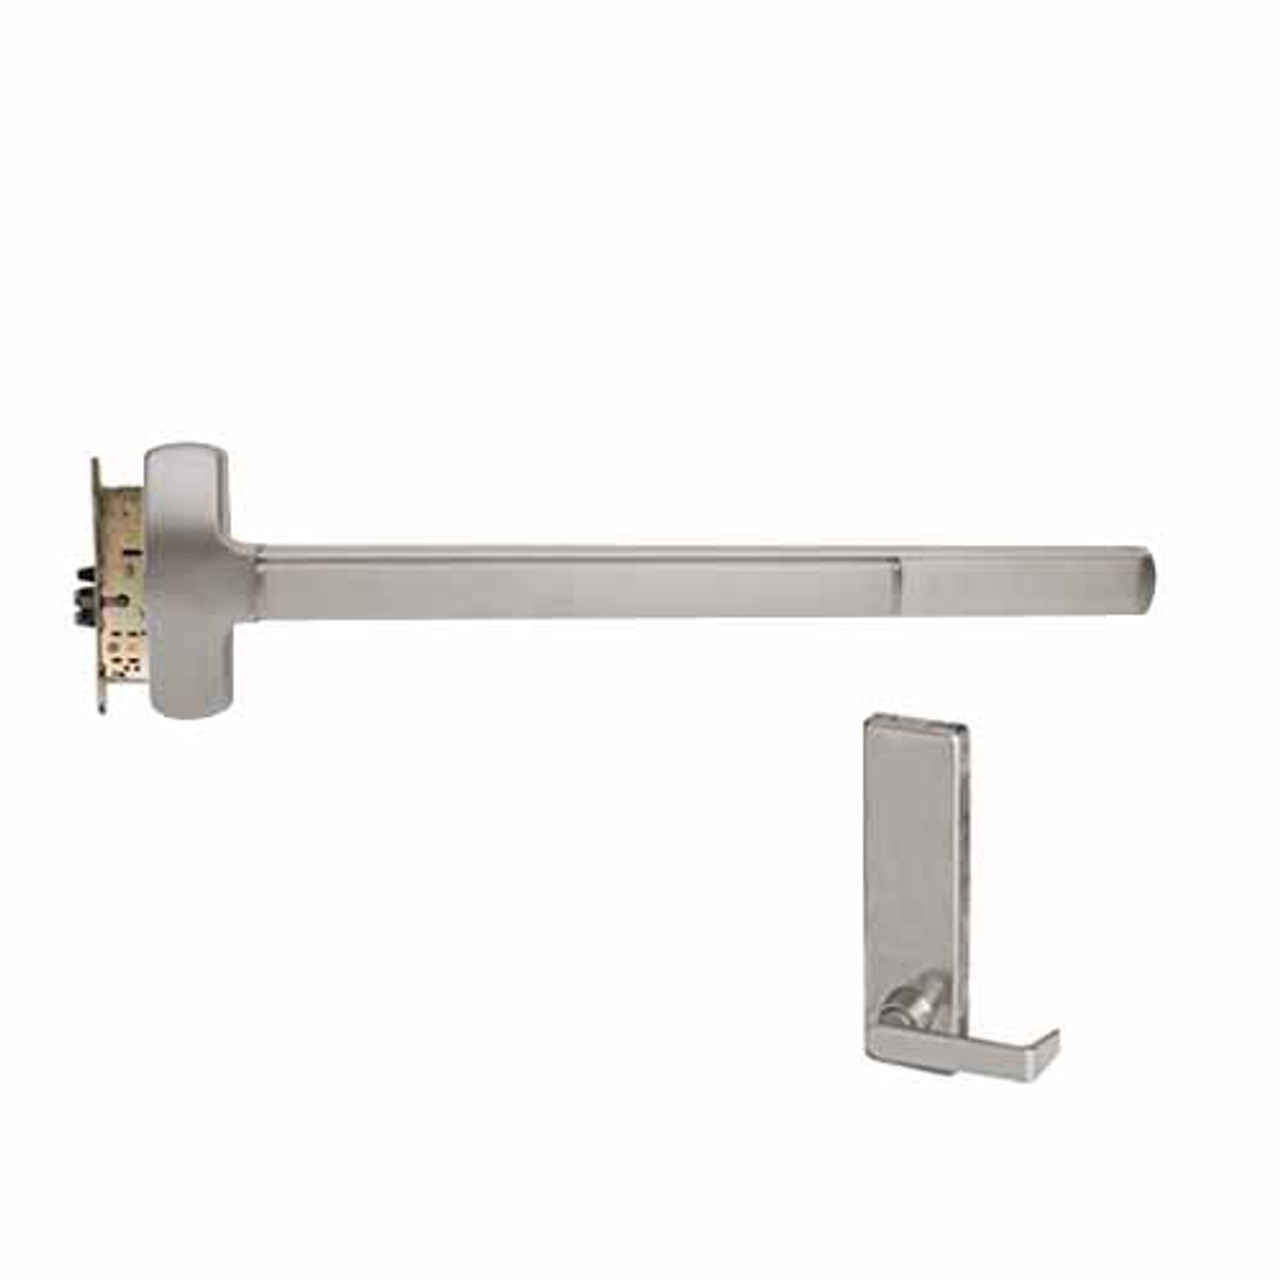 F-25-M-L-BE-Dane-US32D-4-LHR Falcon Exit Device in Satin Stainless Steel